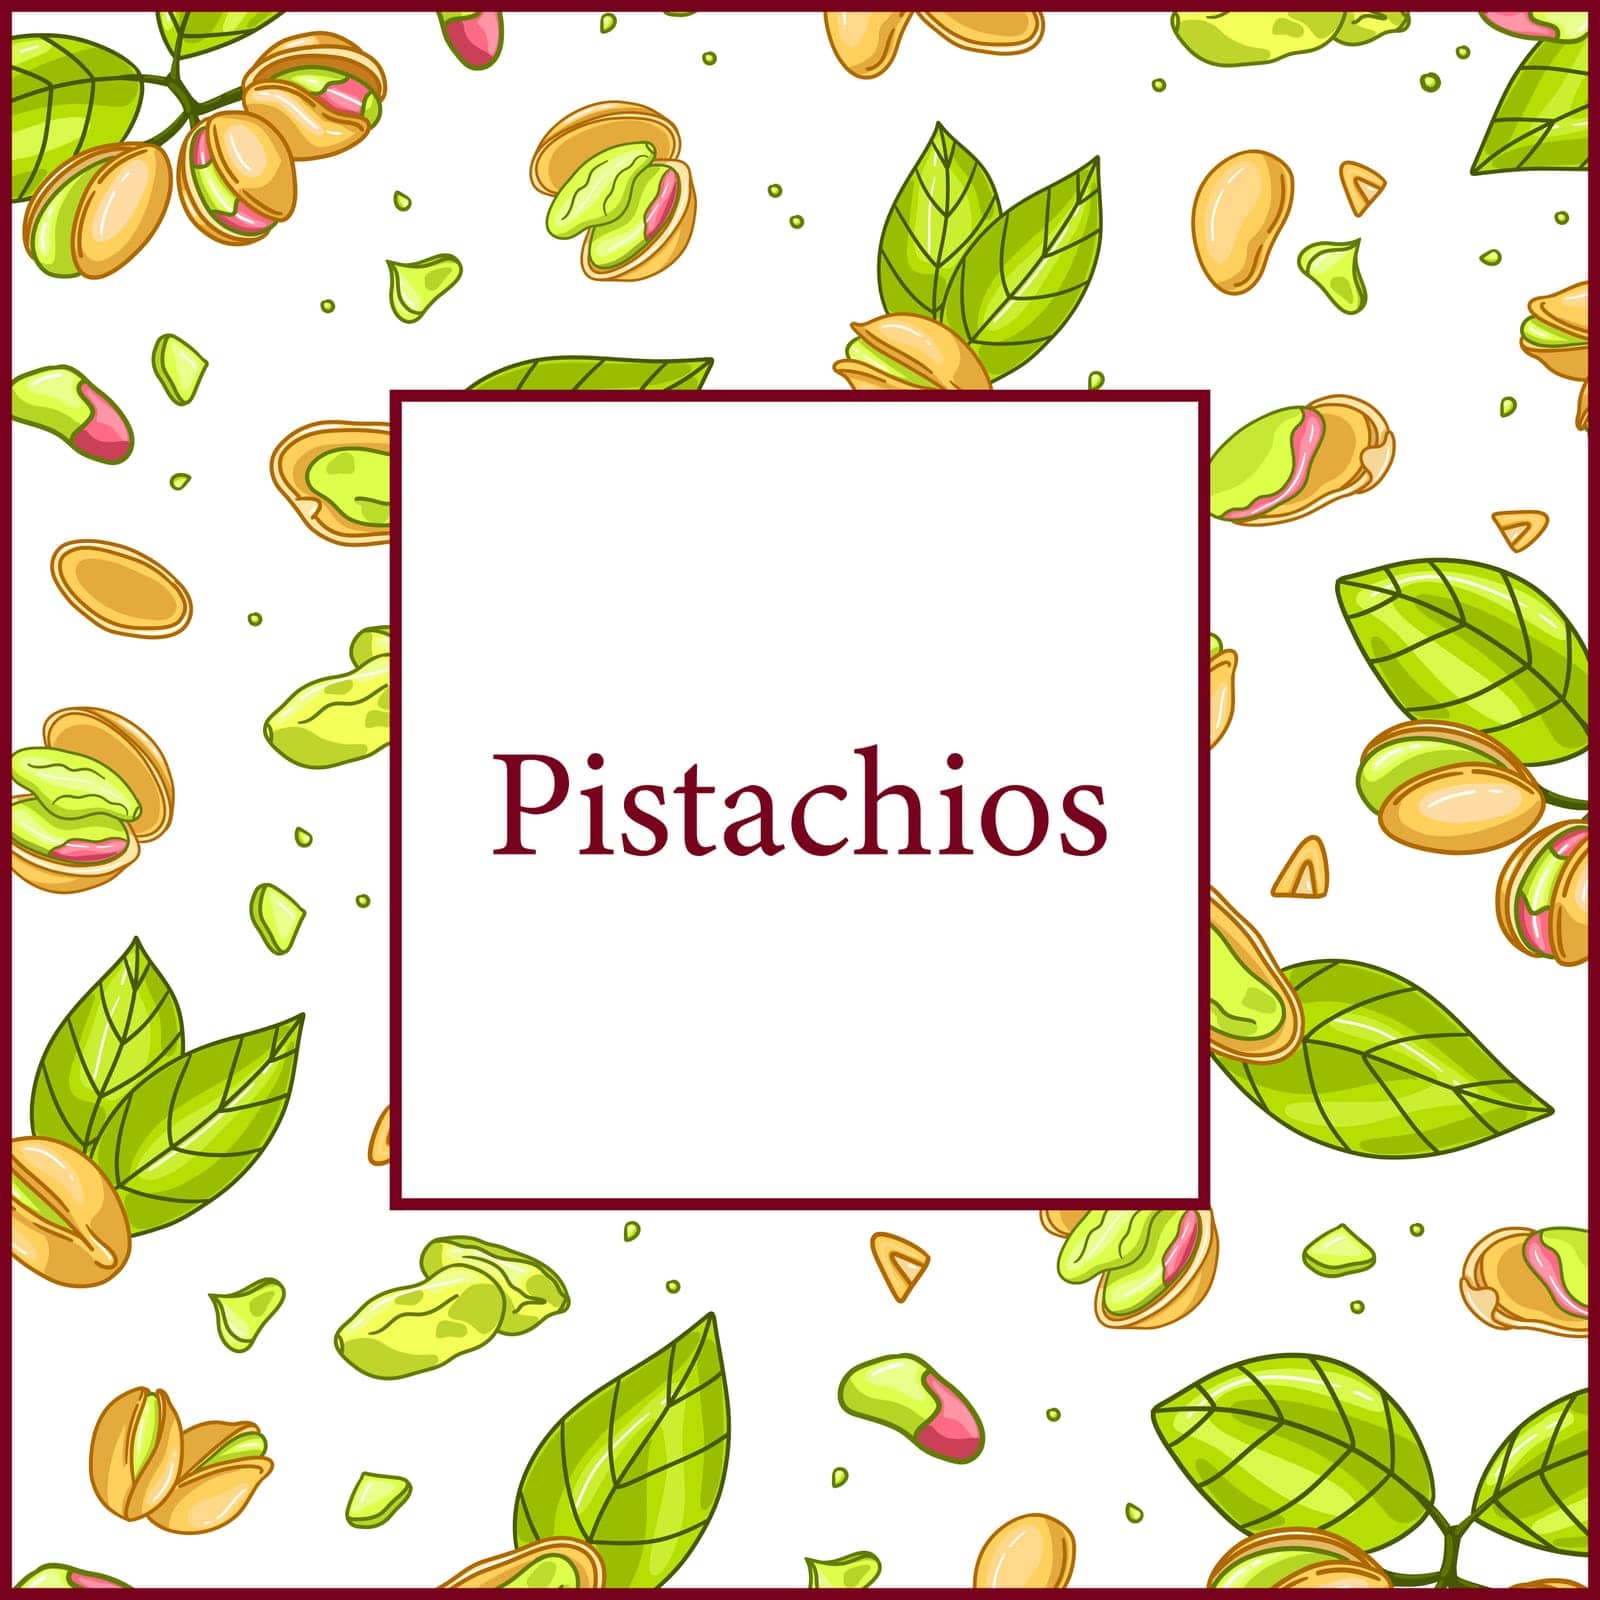 Pistachio frame square menu poster. Vector illustration in hand drawing style. Healthy food ingredient template for vegetarian diet. Retro autumn decoration with leaves, nuts, branches banner